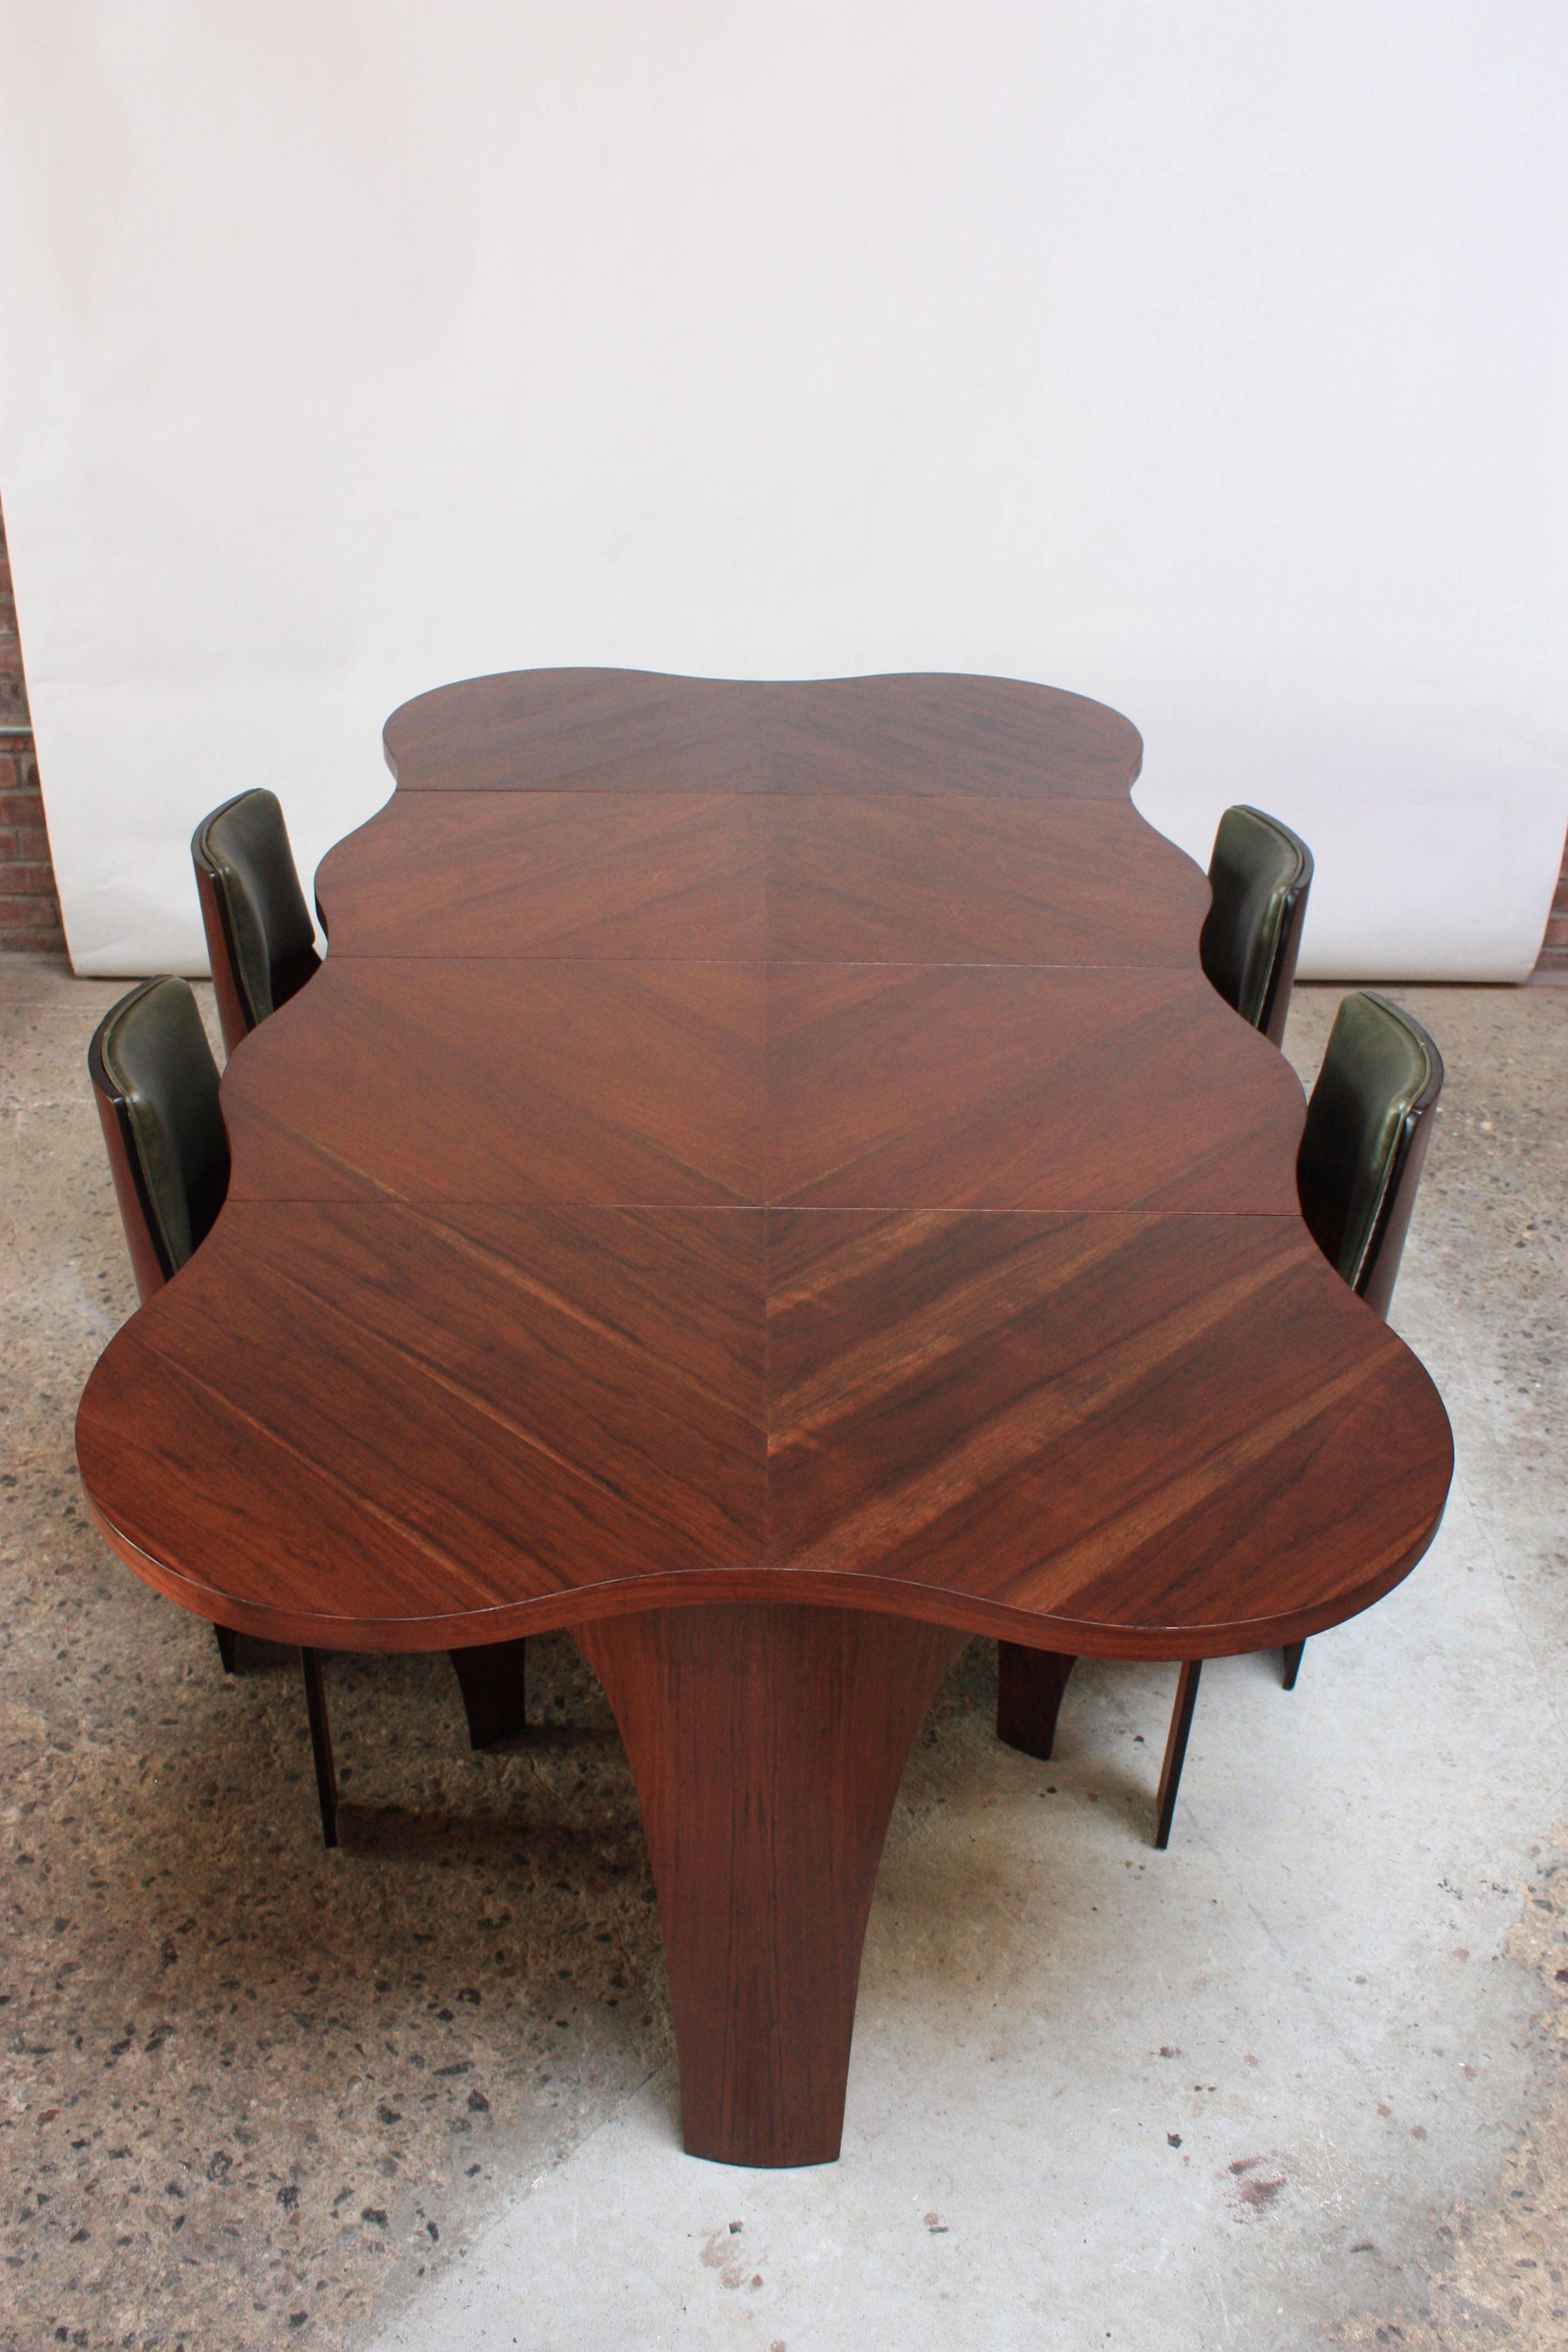 Mid-20th Century Henry Glass 'Cylindra' Walnut Extendable Dining Table and Four Chairs